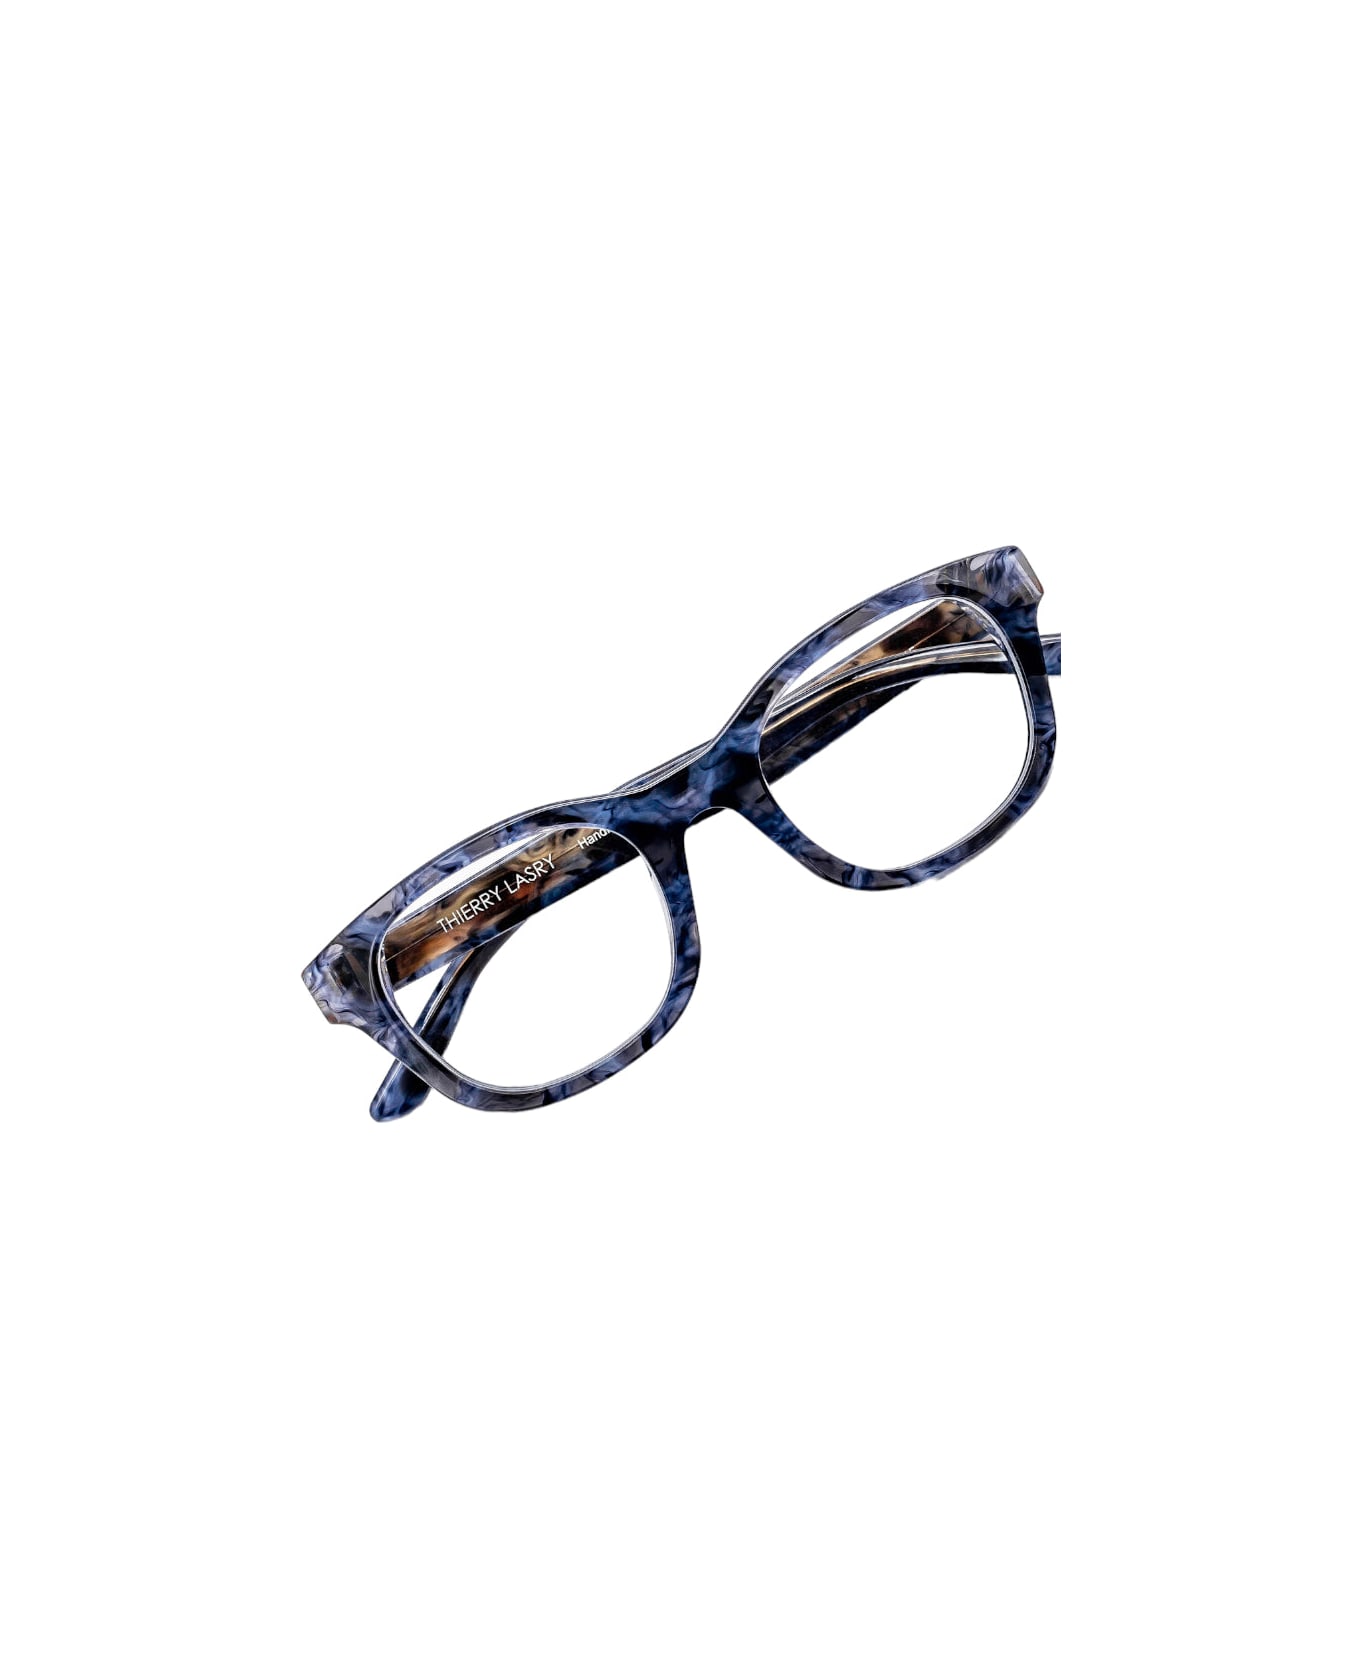 Thierry Lasry Chaoty - Blue Havana Glasses アイウェア